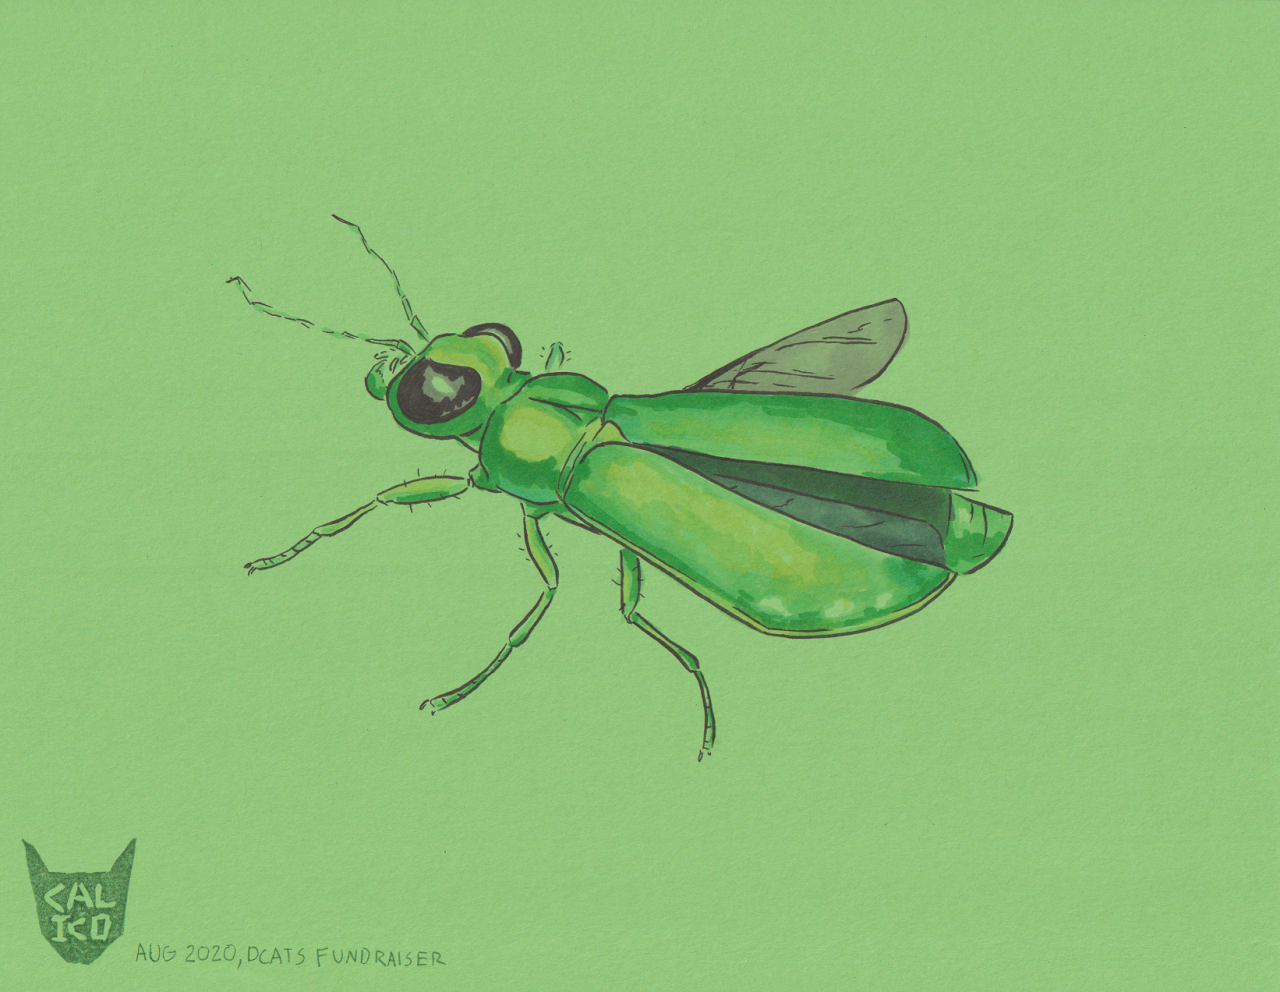 Pen and colored ink: a metallic green beetle with wings half-opening on a green background.